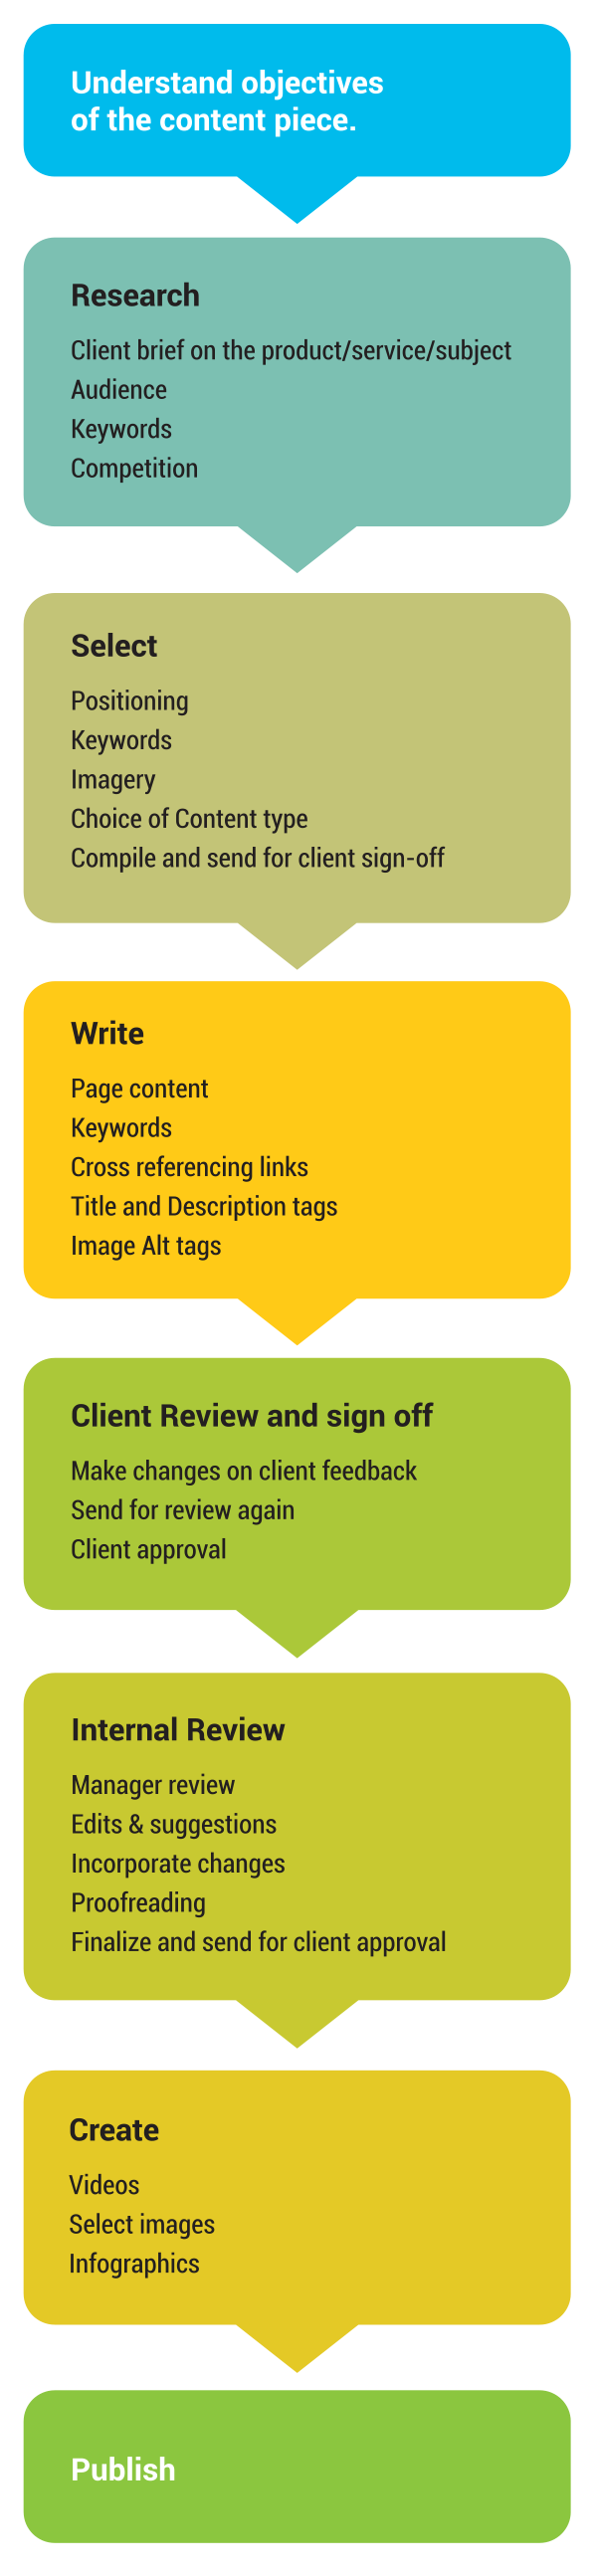 Content Creation and Review Process